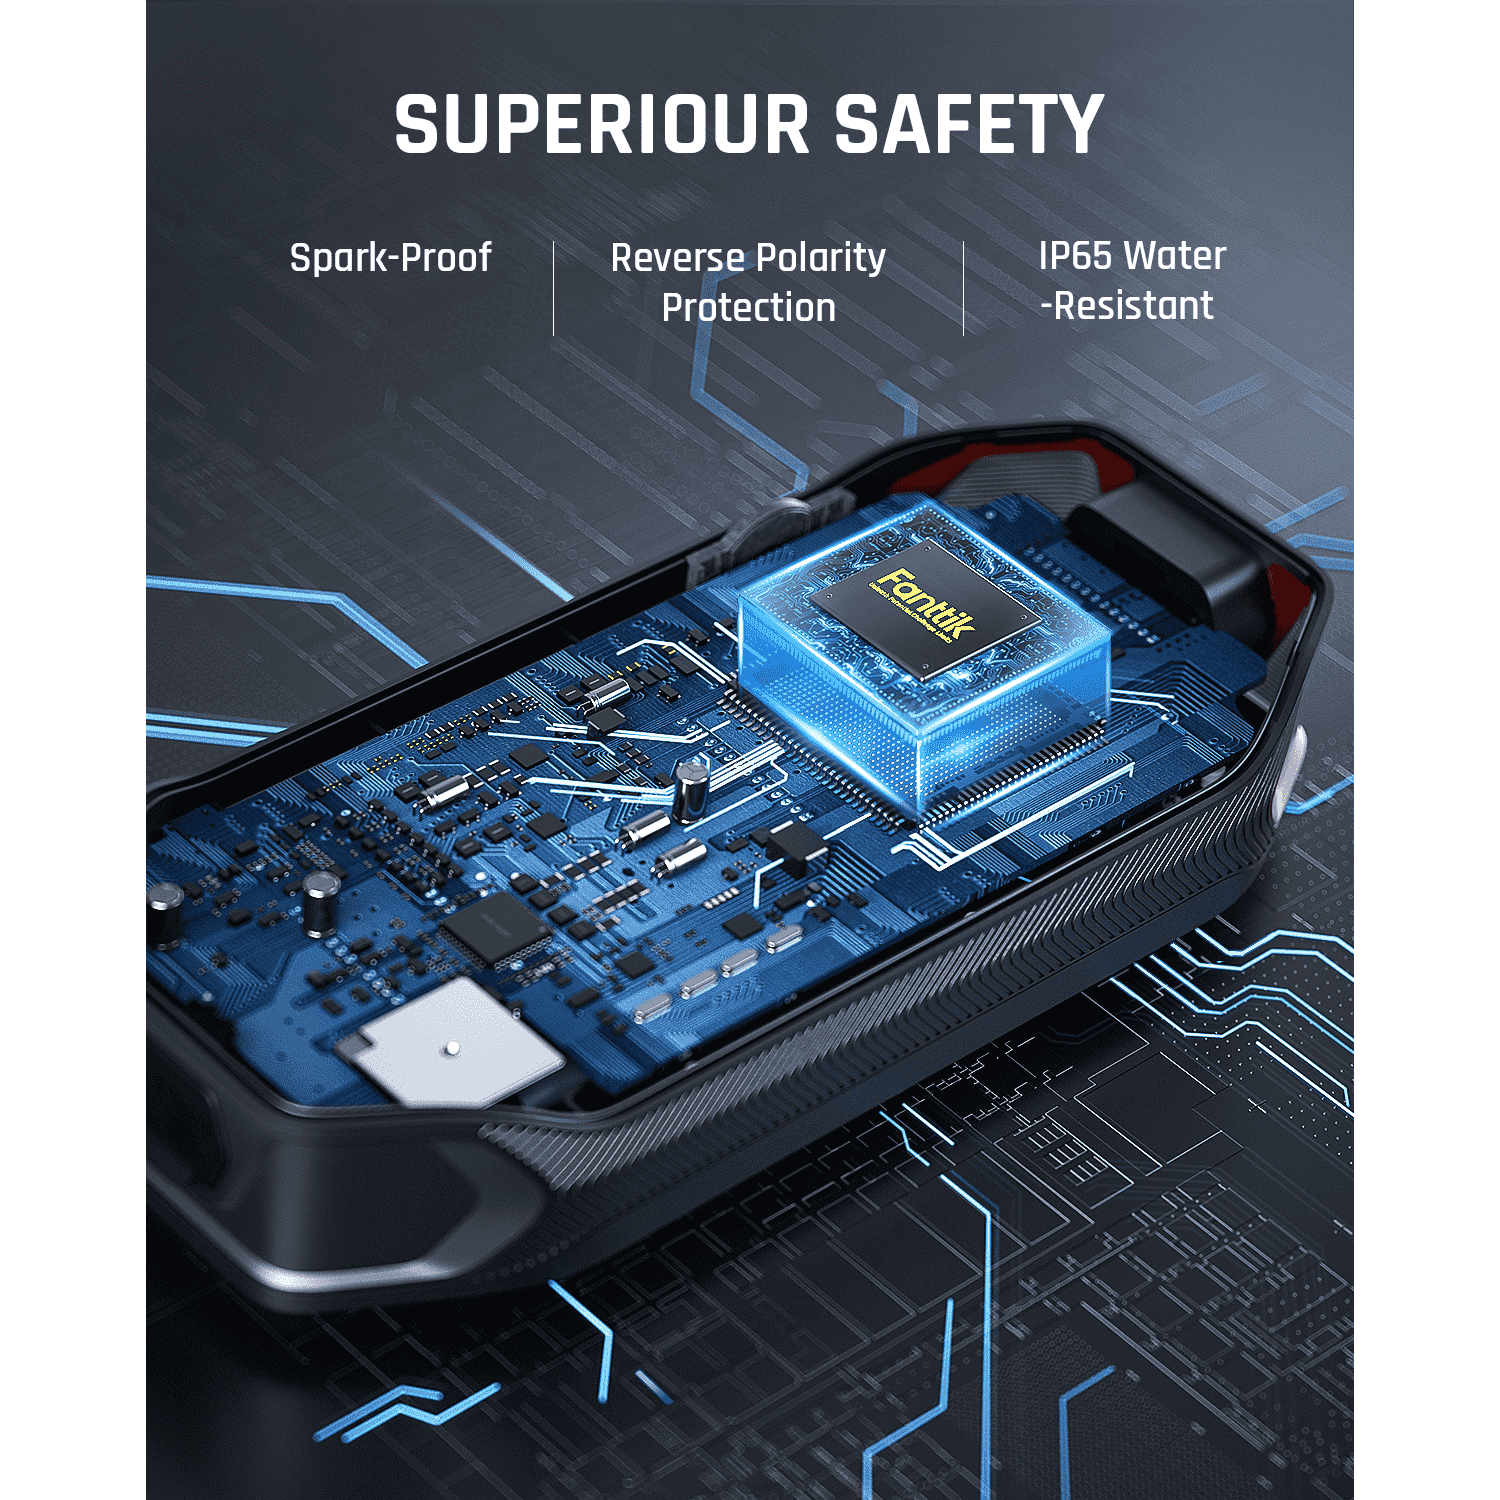 Fanttik T8 Jump Starter with our mistake-free design featuring reverse polarity and spark-proof technology, you have no worry of incorrect connections.